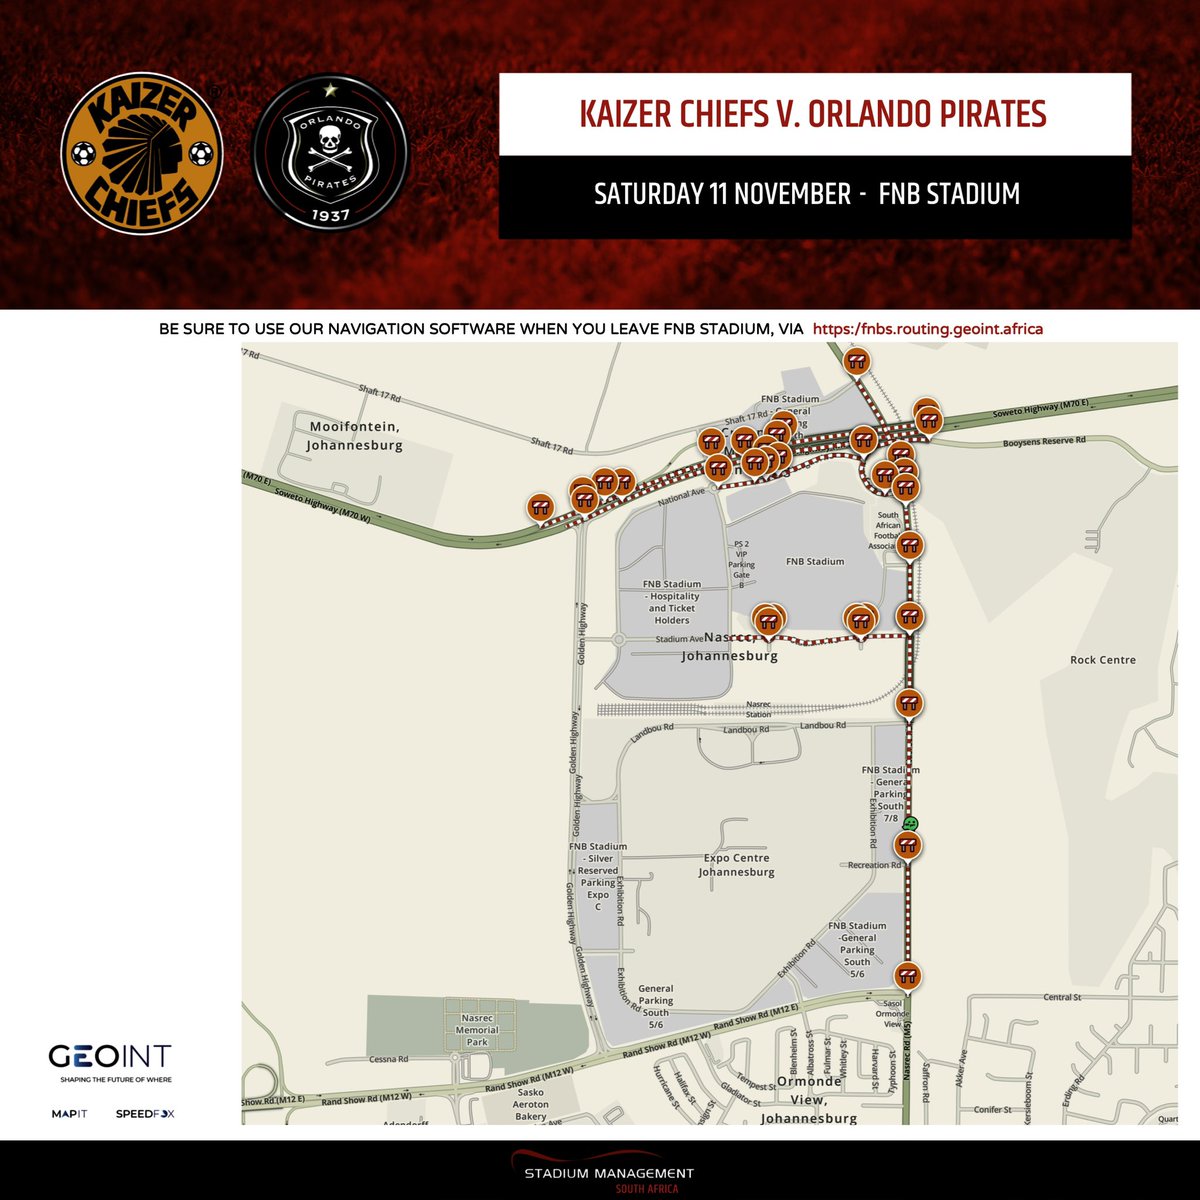 Want to know the best ways out of FNB Stadium? Use our navigation software to guide you home. Access it via fnbs.routing.geoint.africa #SMSA #FNBStadium #SowetoDerby